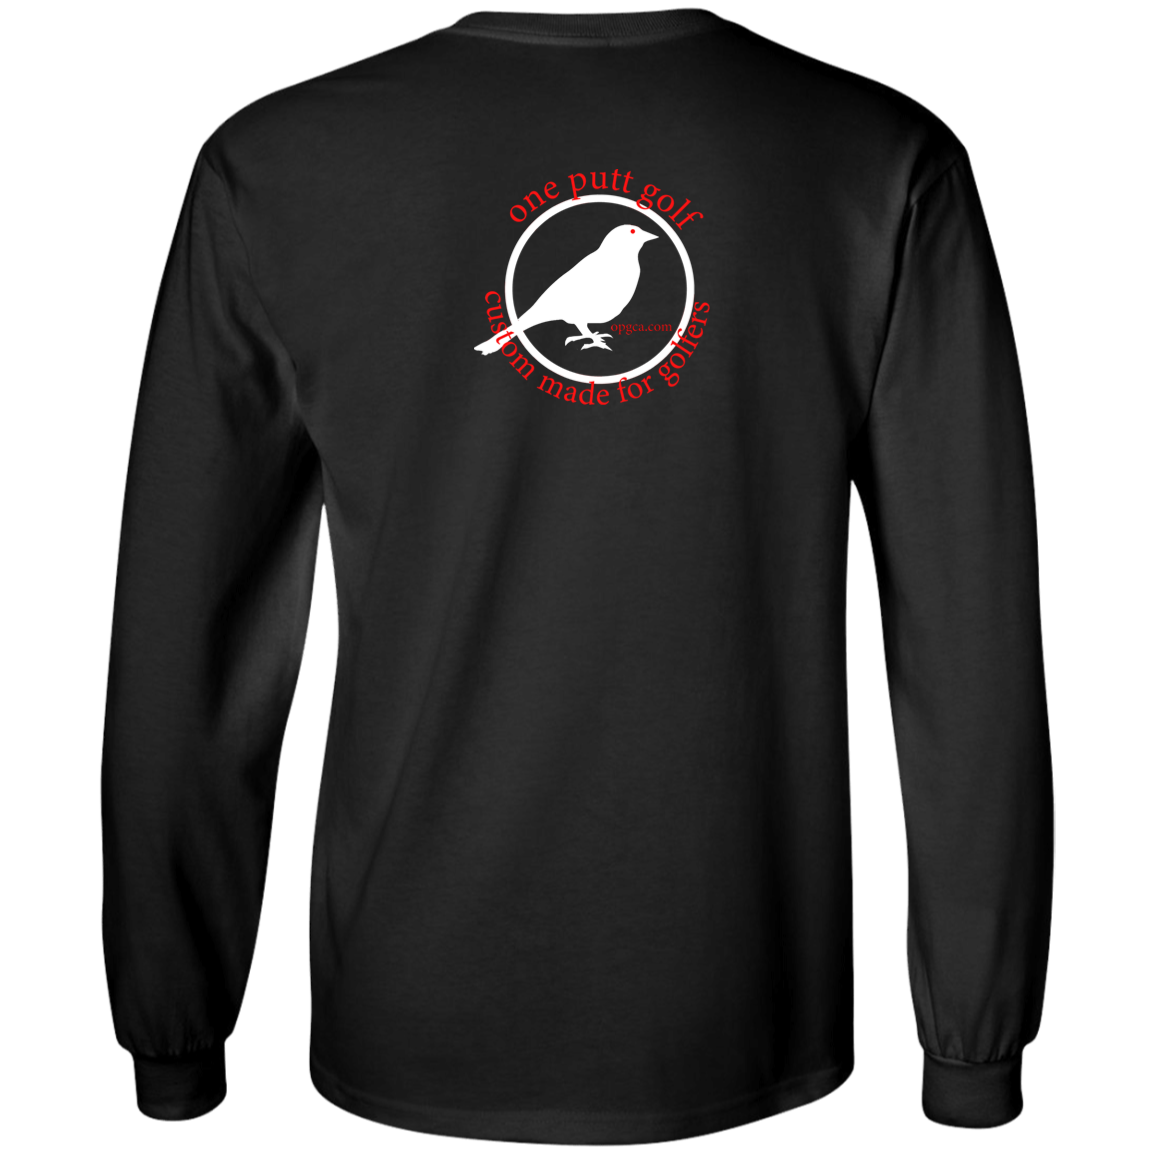 OPG Custom Design # 24. Ornithologist. A person who studies or is an expert on birds. 100% Cotton Long Sleeve T-Shirt